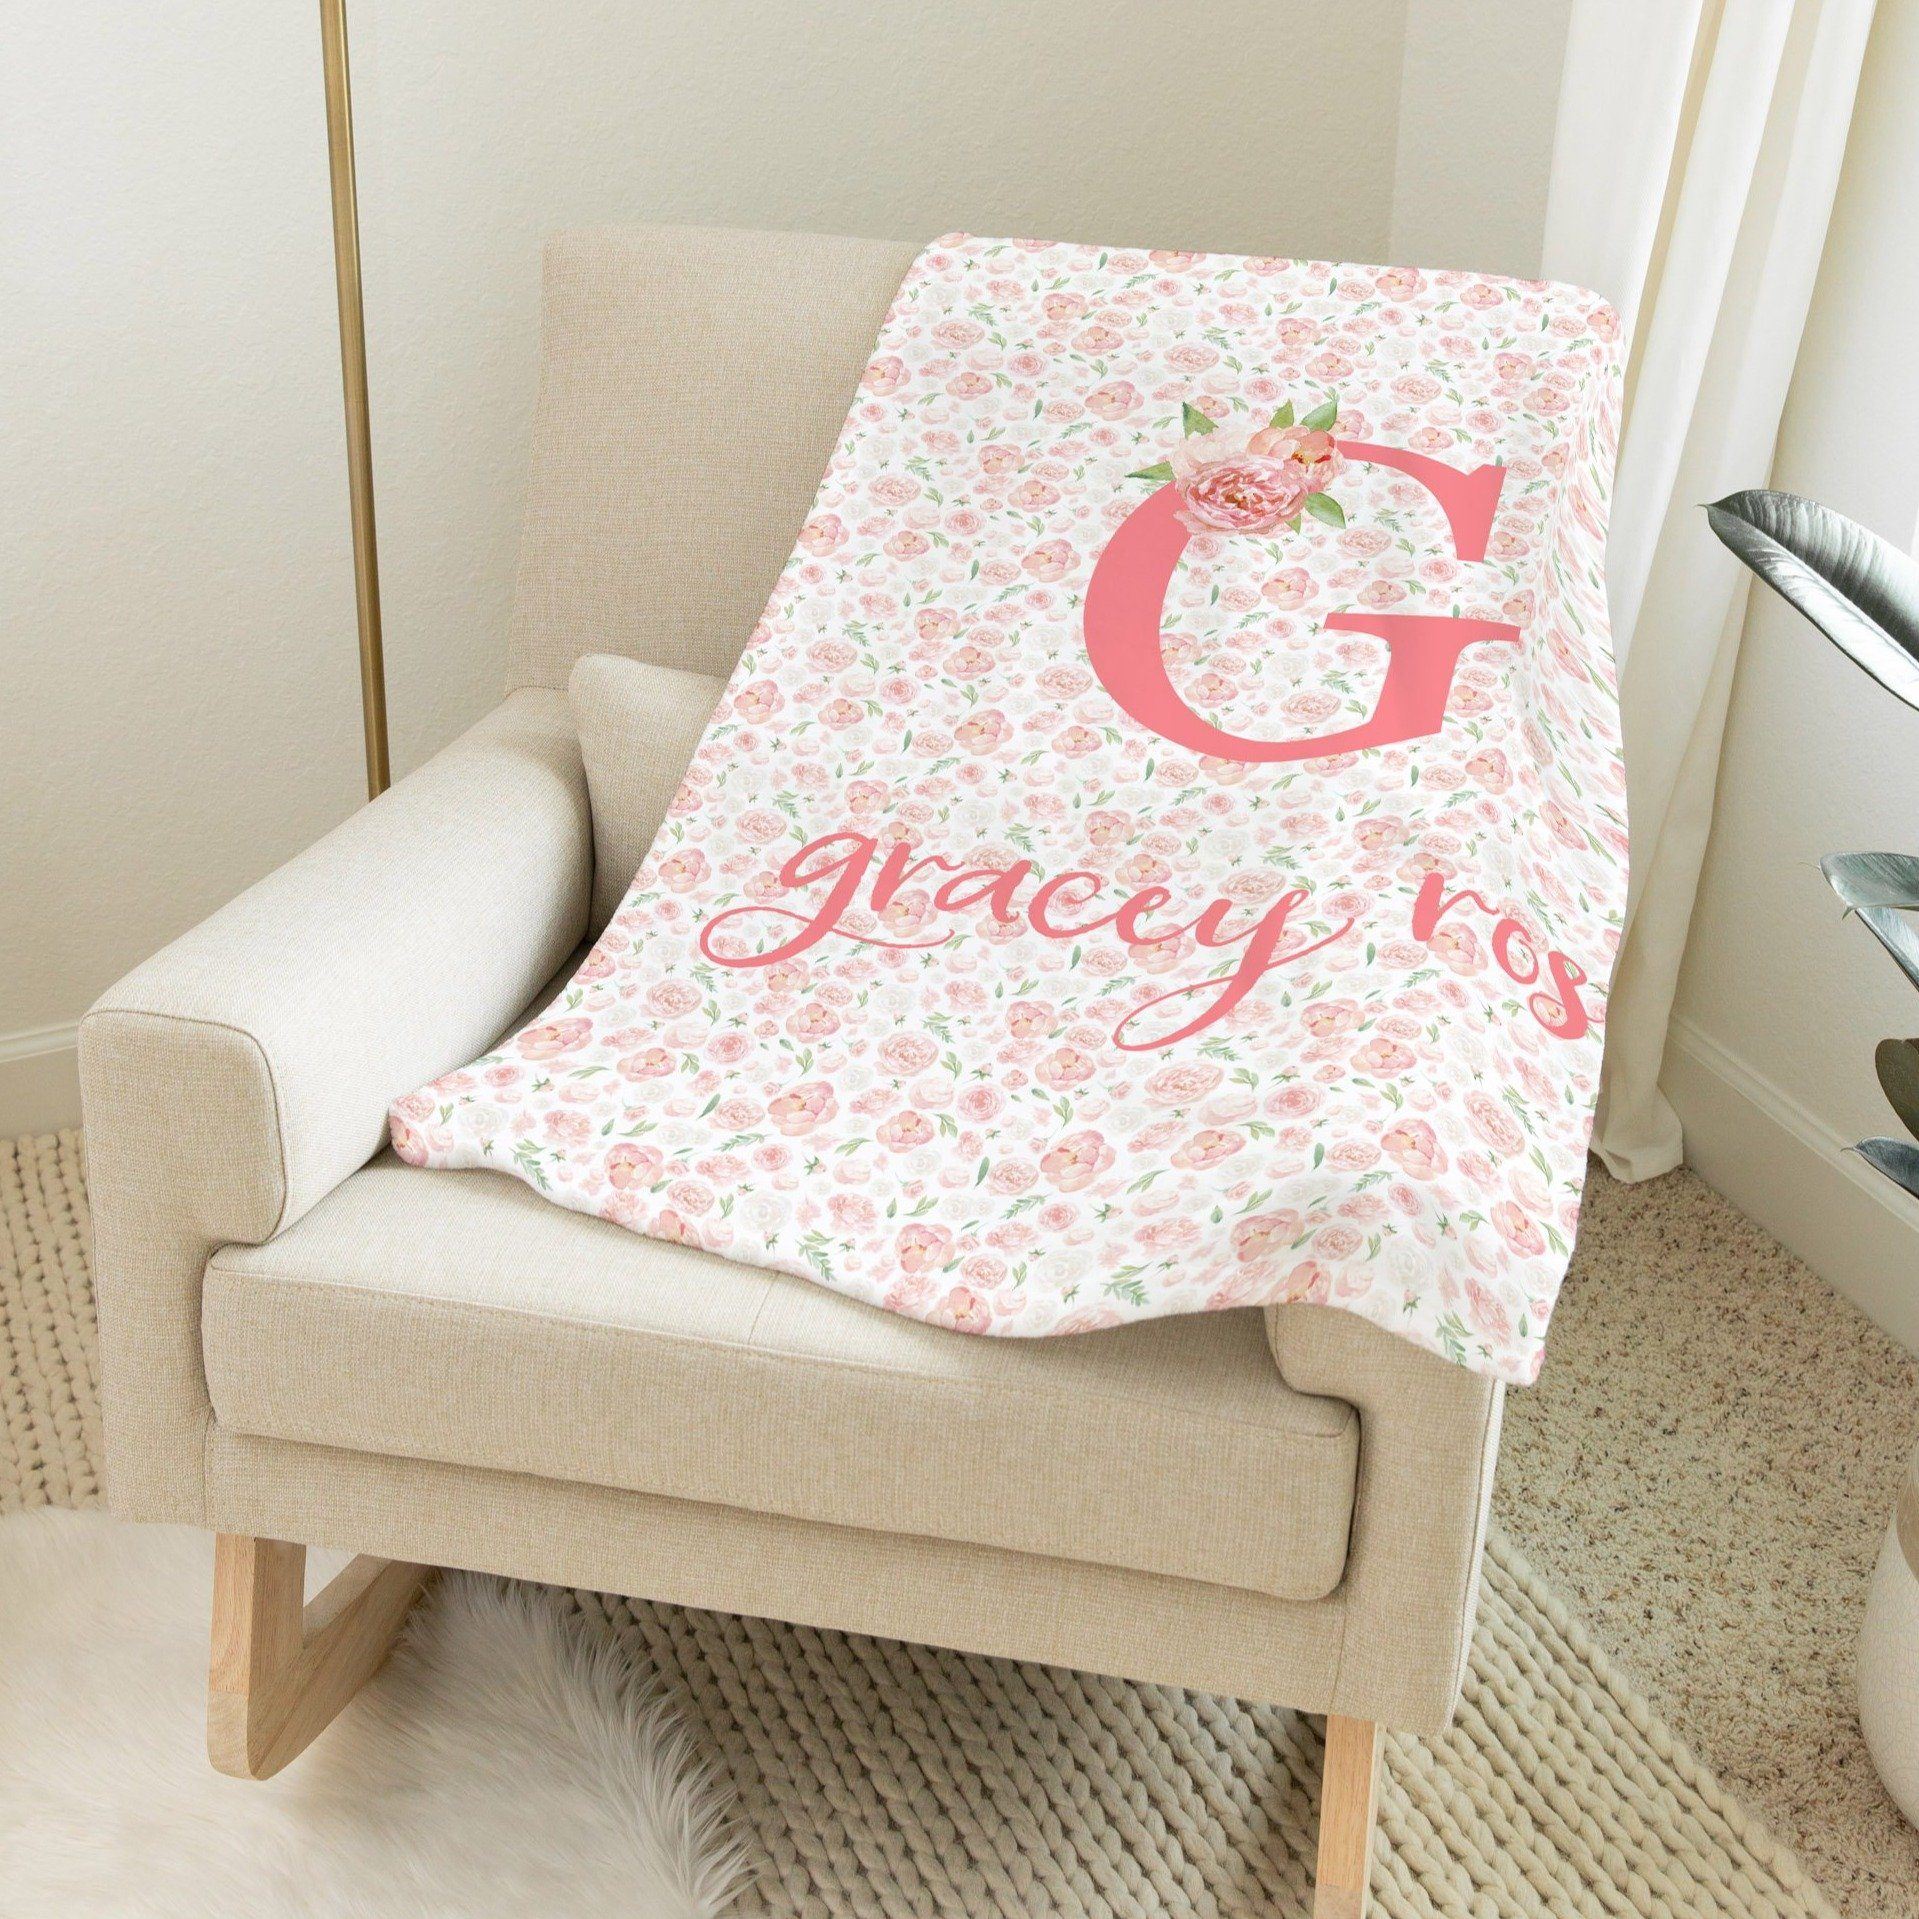 Dark Blush Floral Blanket Personalized Baby Blankets With Name TheGracefulGoose